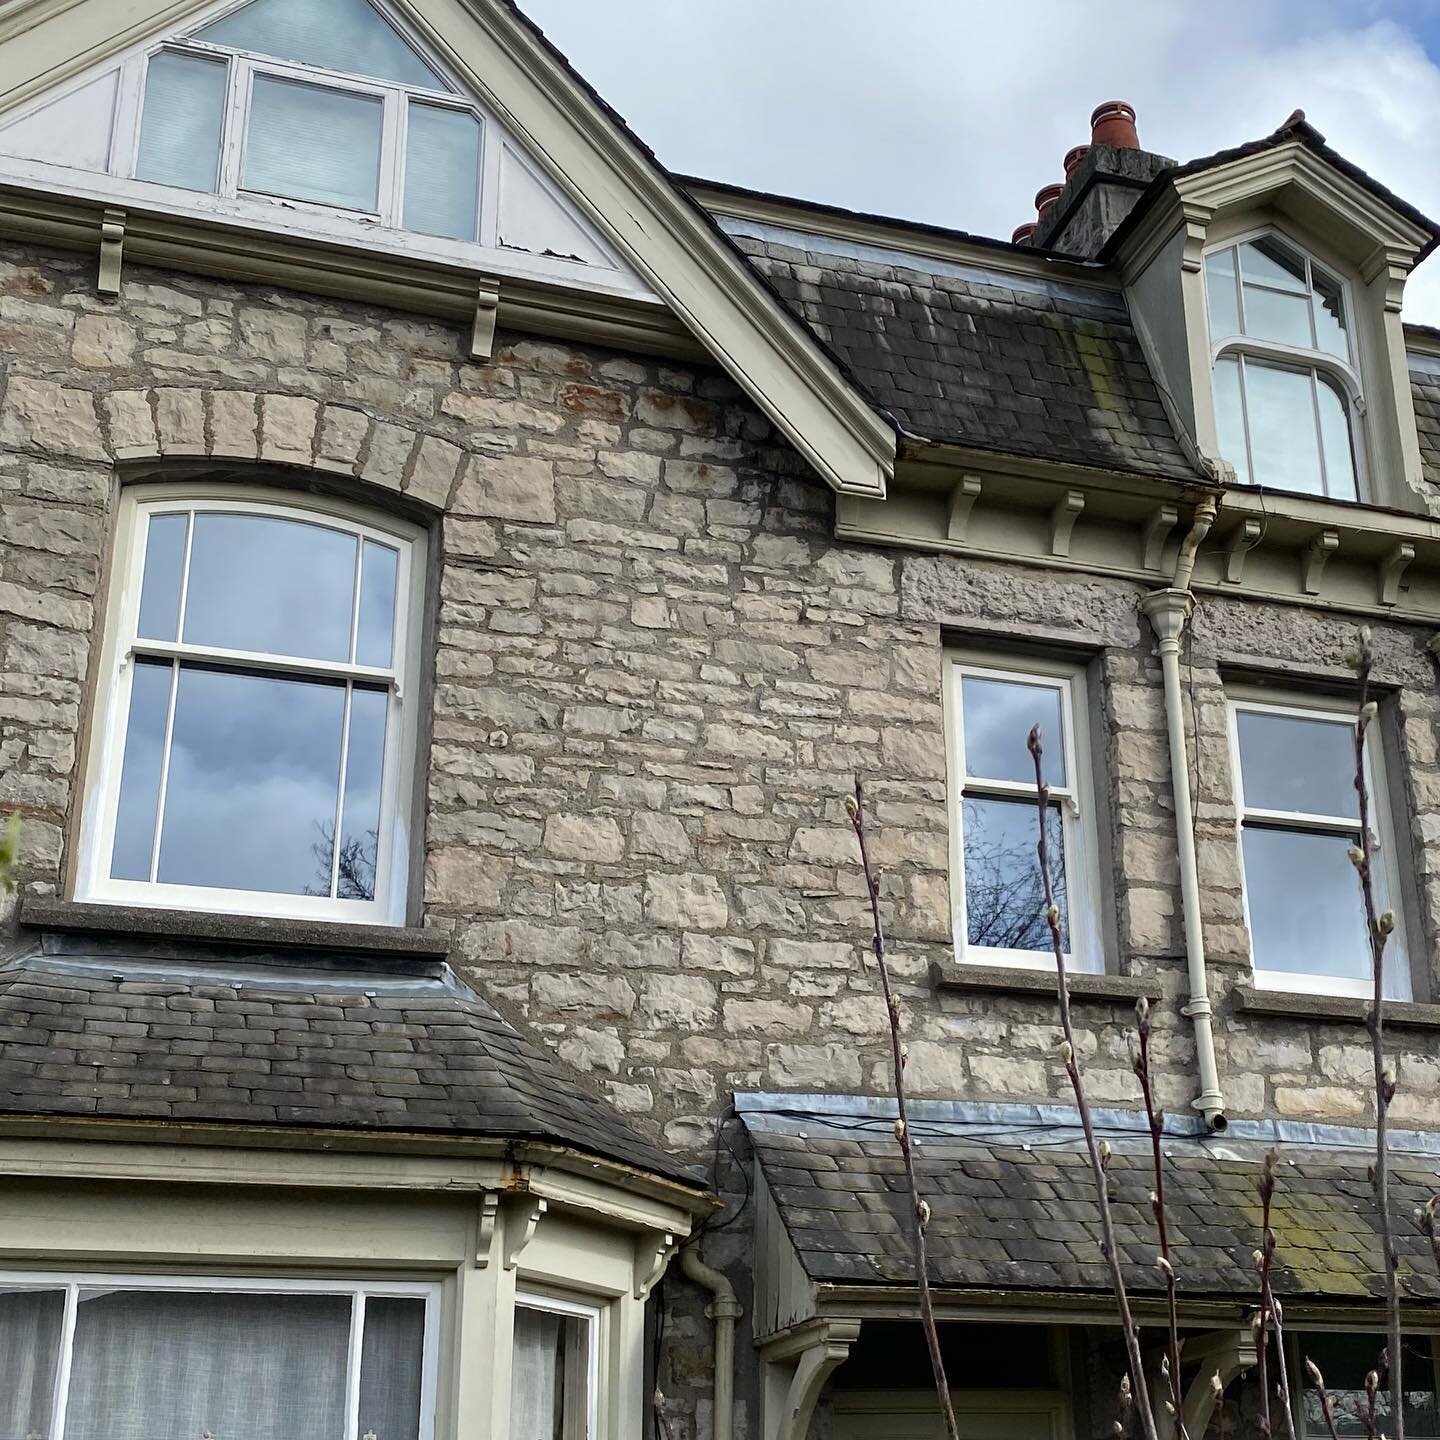 3 out of 5 sash windows completed over the past couple of days in #Kendal #cumbria. We have renovated the original box frames, replacing the rotten cills with new accoya wood cills and have installed our @accoyawood double glazed sashes to replace th